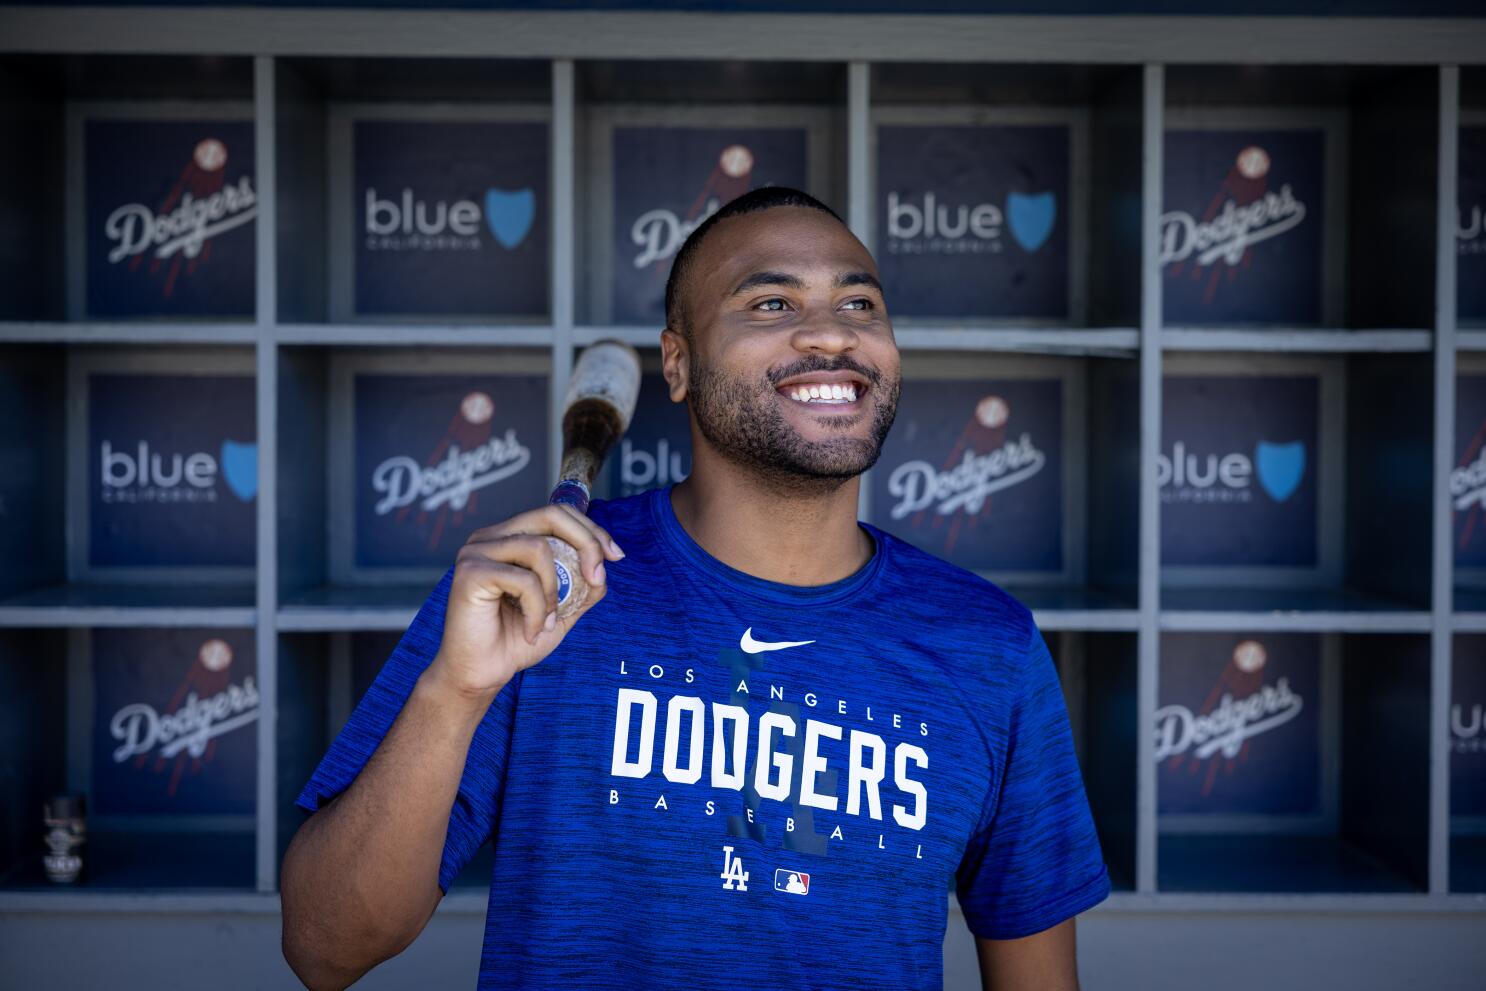 RJ Peete hasn't let autism stop him from being part of Dodgers